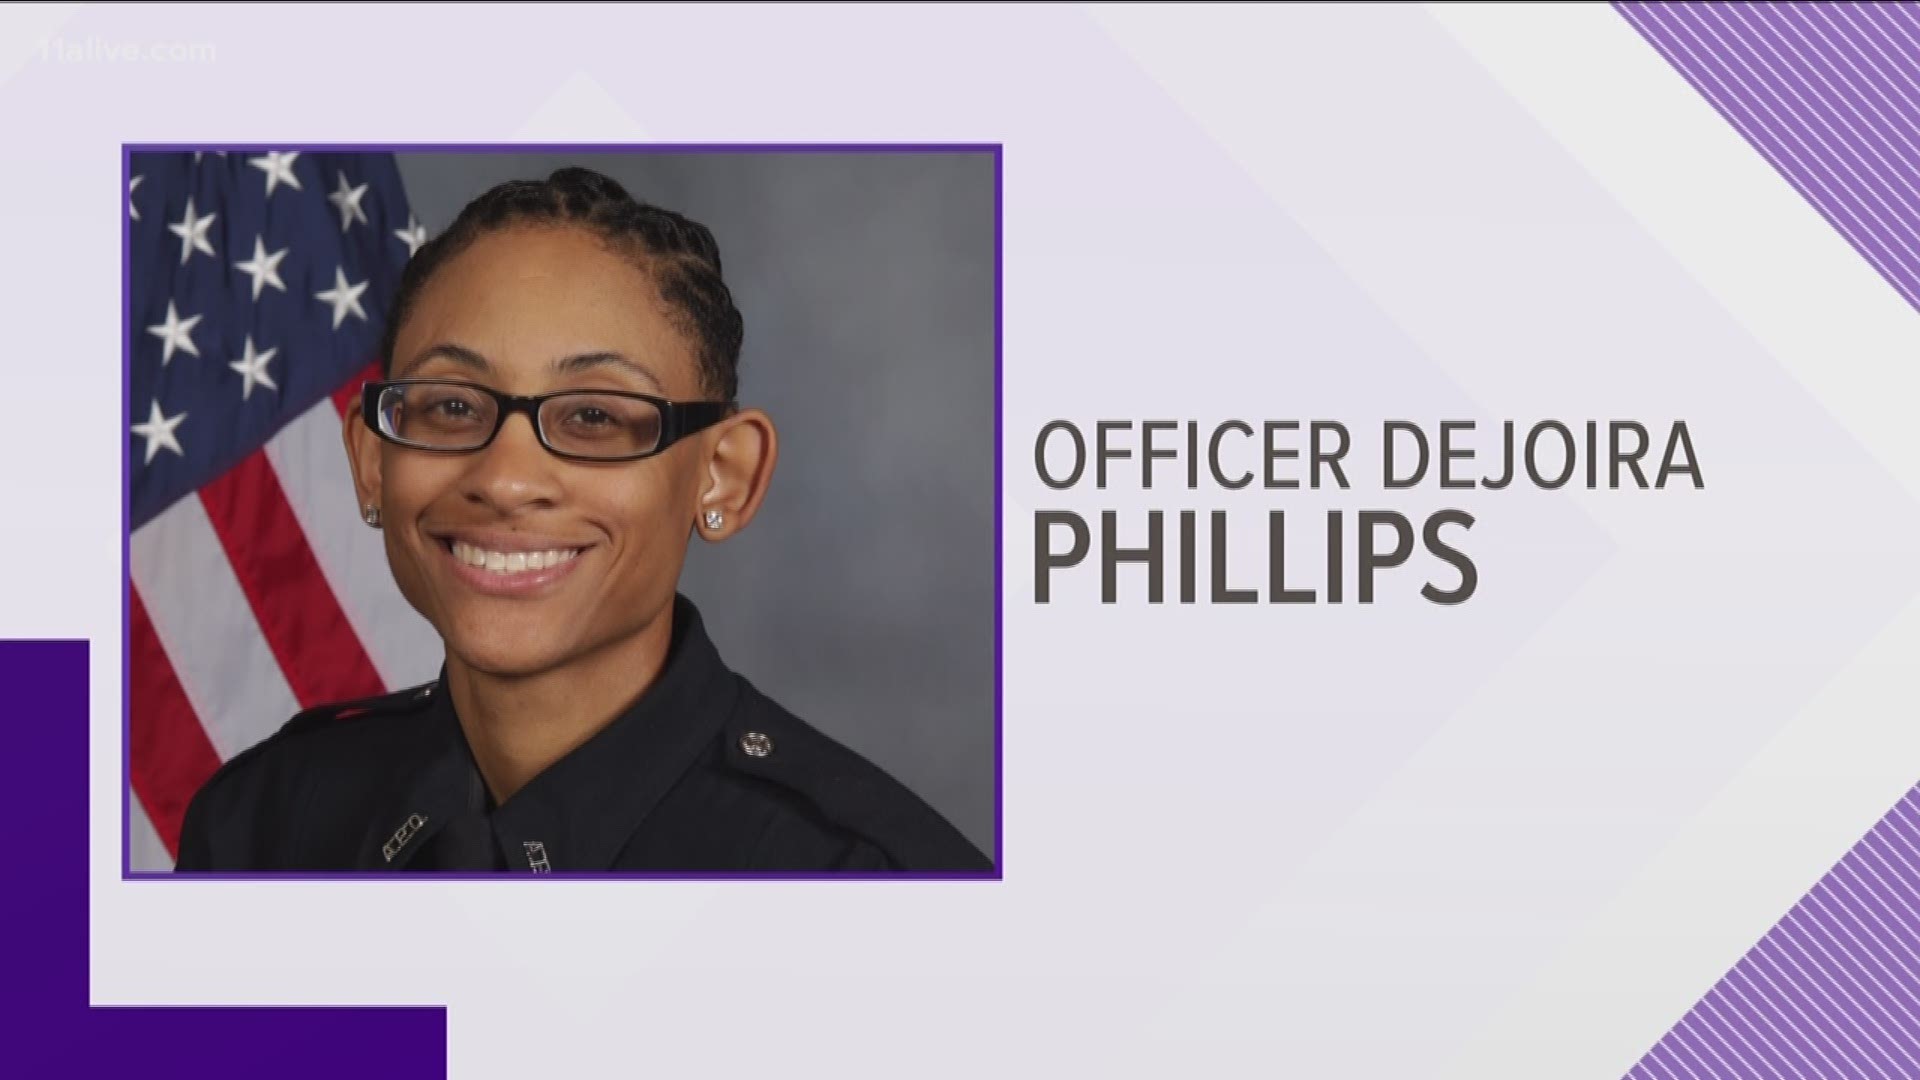 Police spokesperson Carlos Campos confirmed that following the criminal indictment on Wednesday, Dejoira Phillips was suspended with pay until she can attend a hearing before the police chief in the coming week.